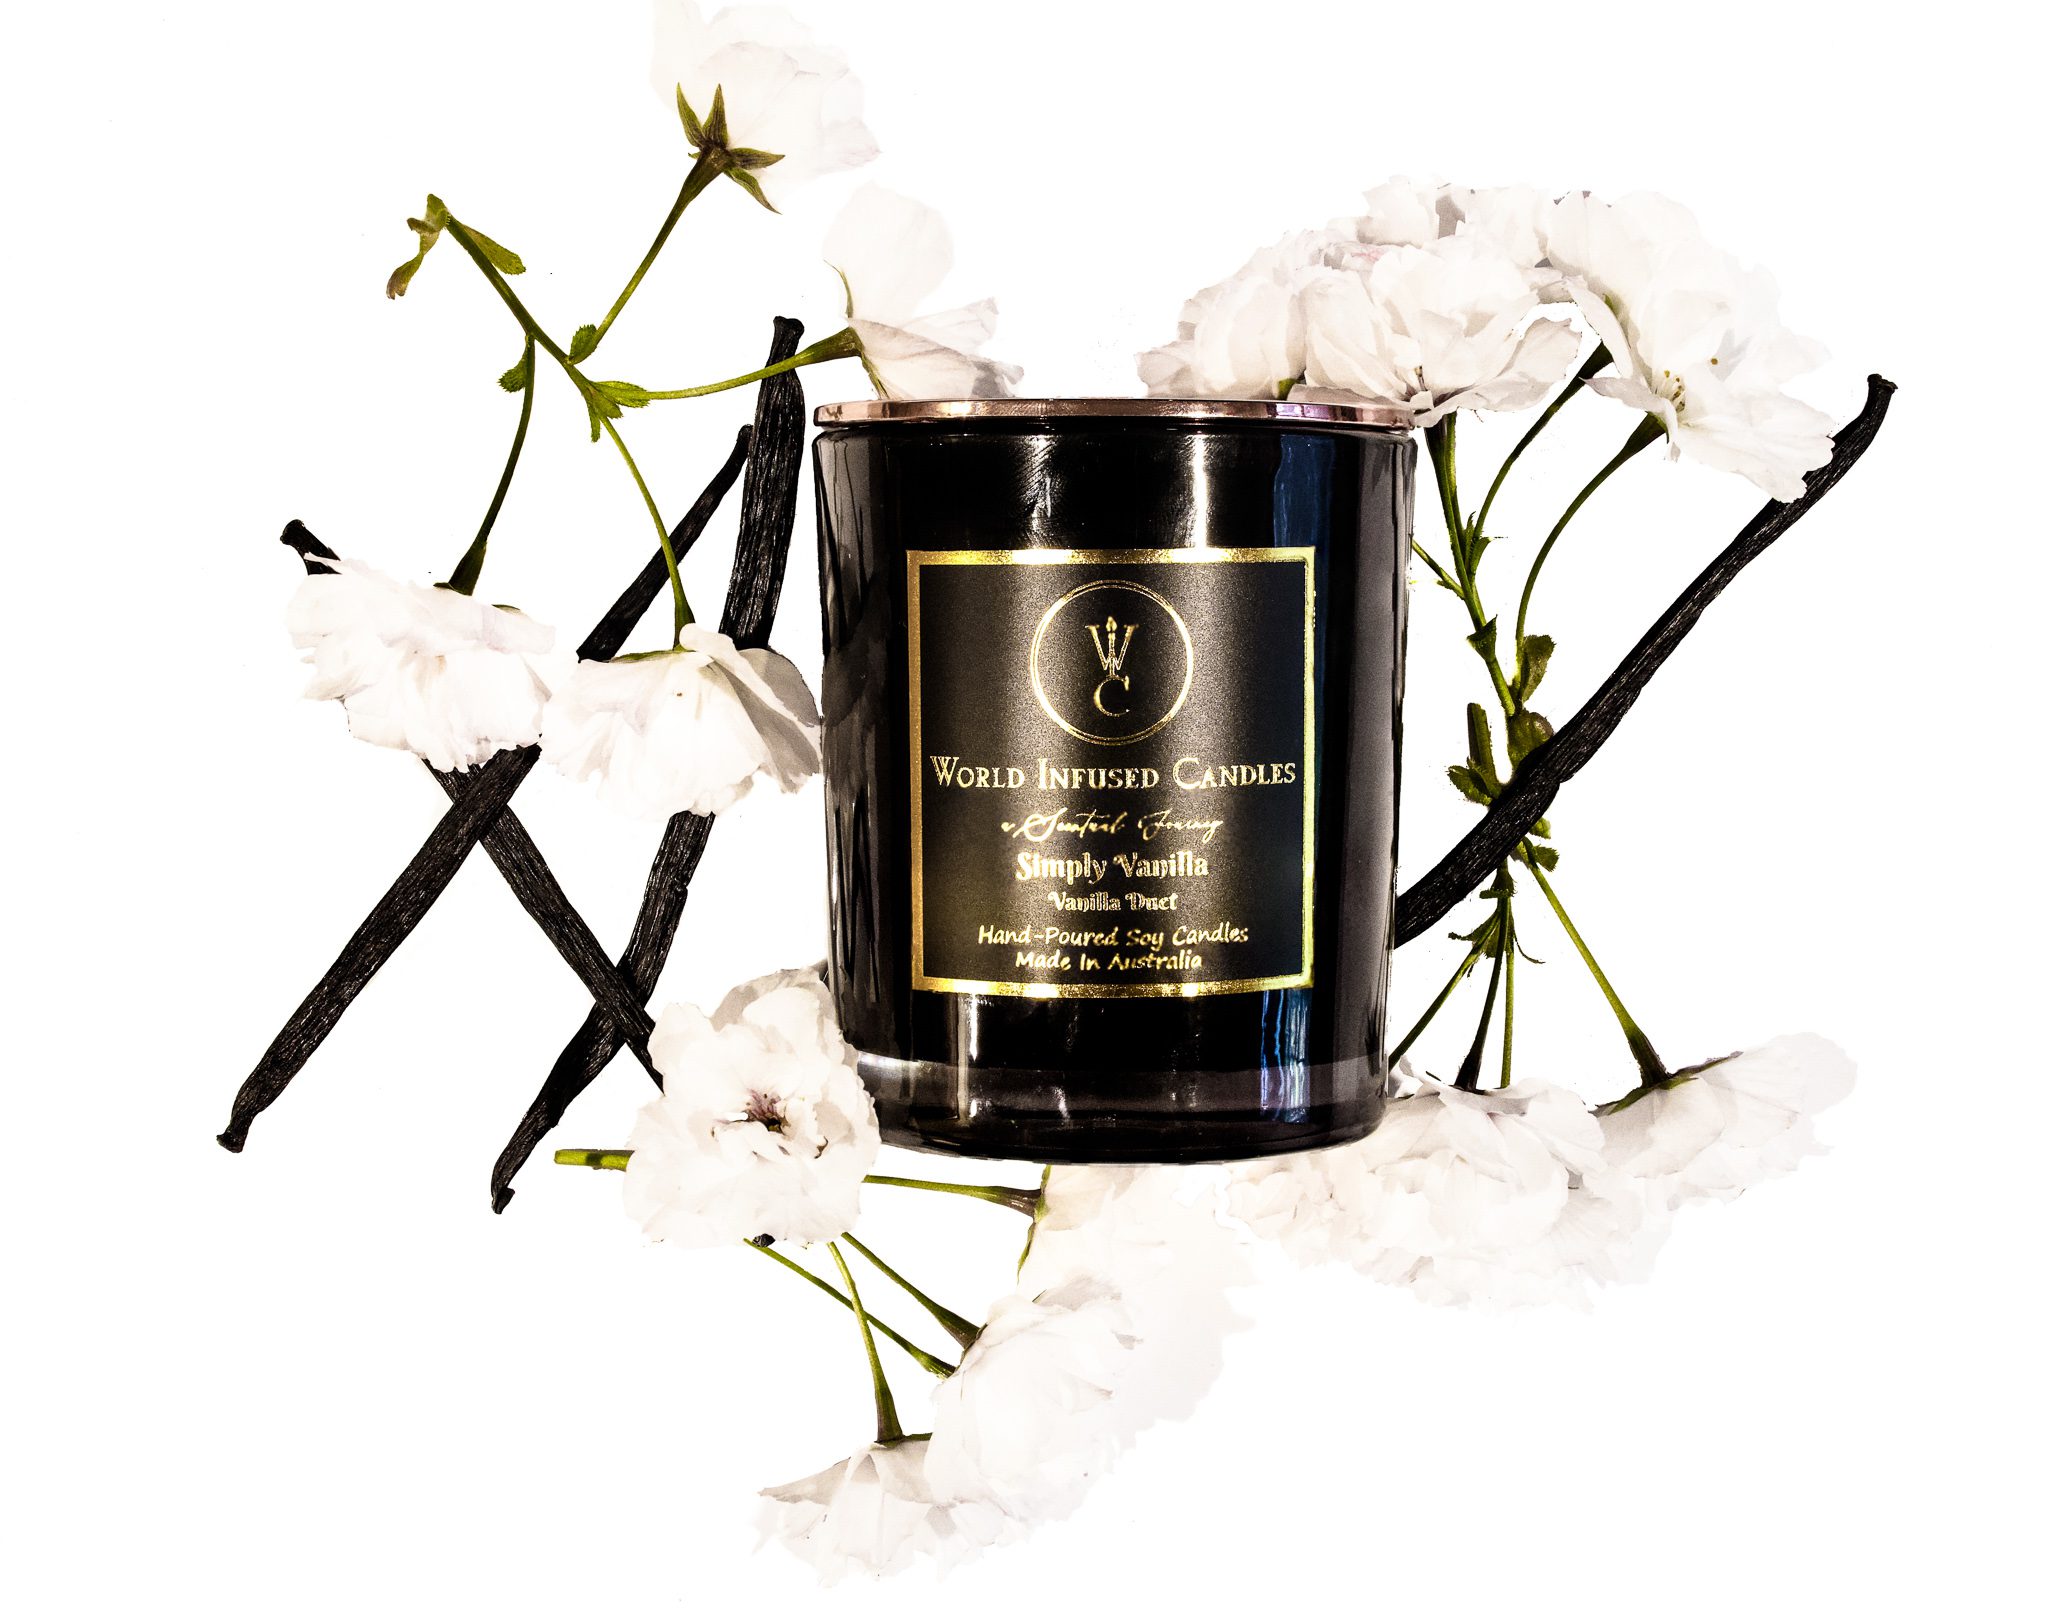 Simply Vanilla Soy Candle surrounded with Vanilla bean pods